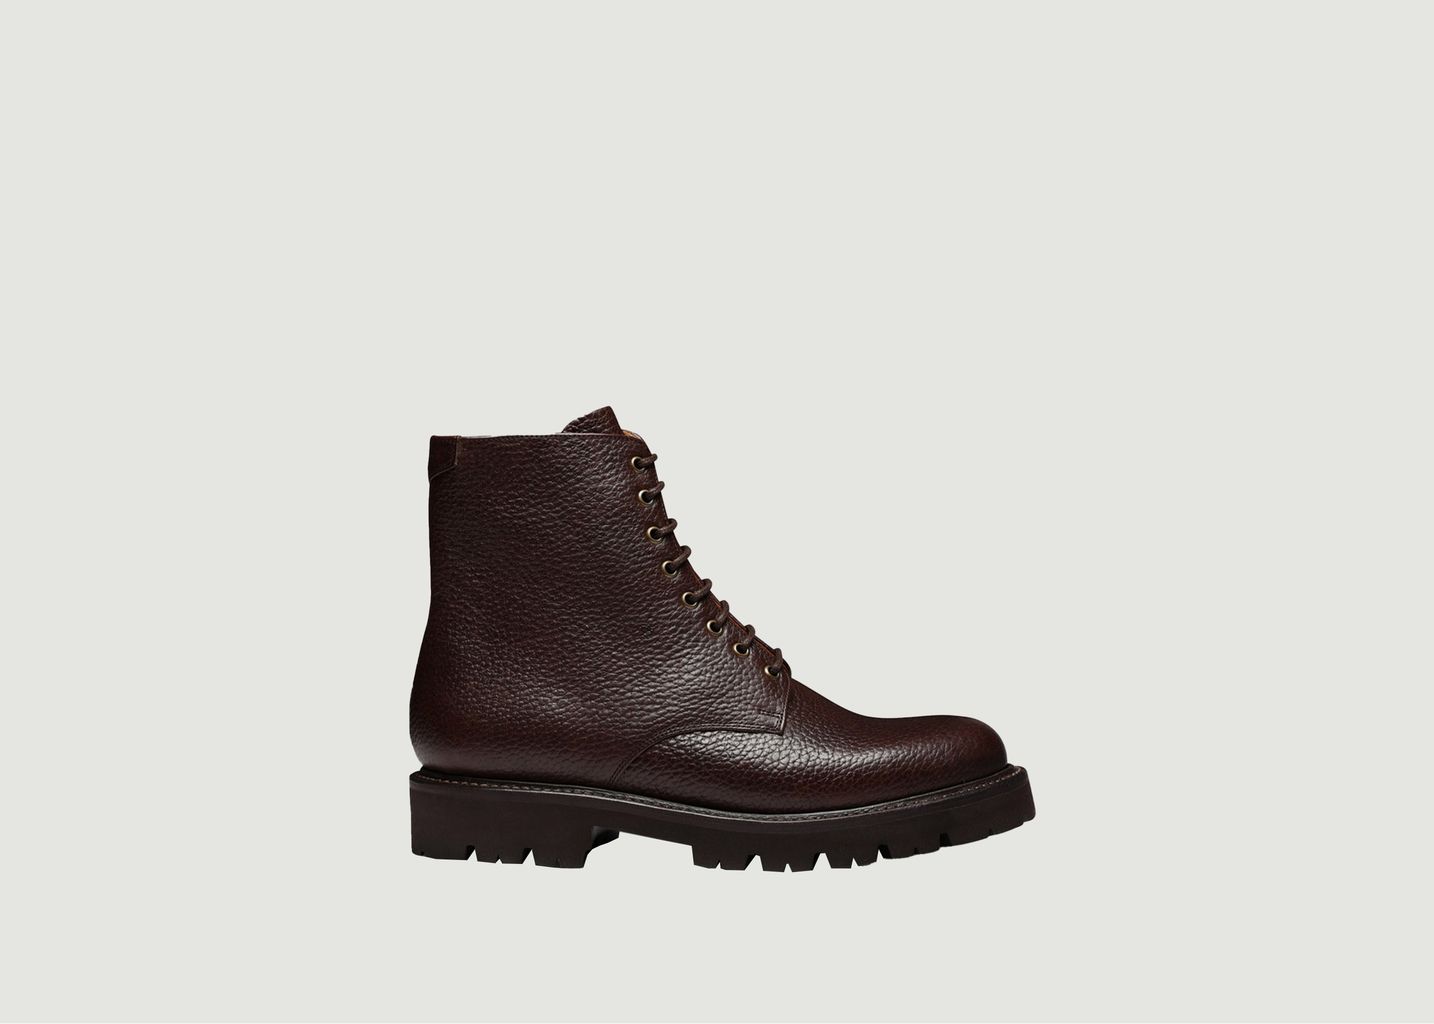 Grenson Hadley Boots In Hammered Calf Leather